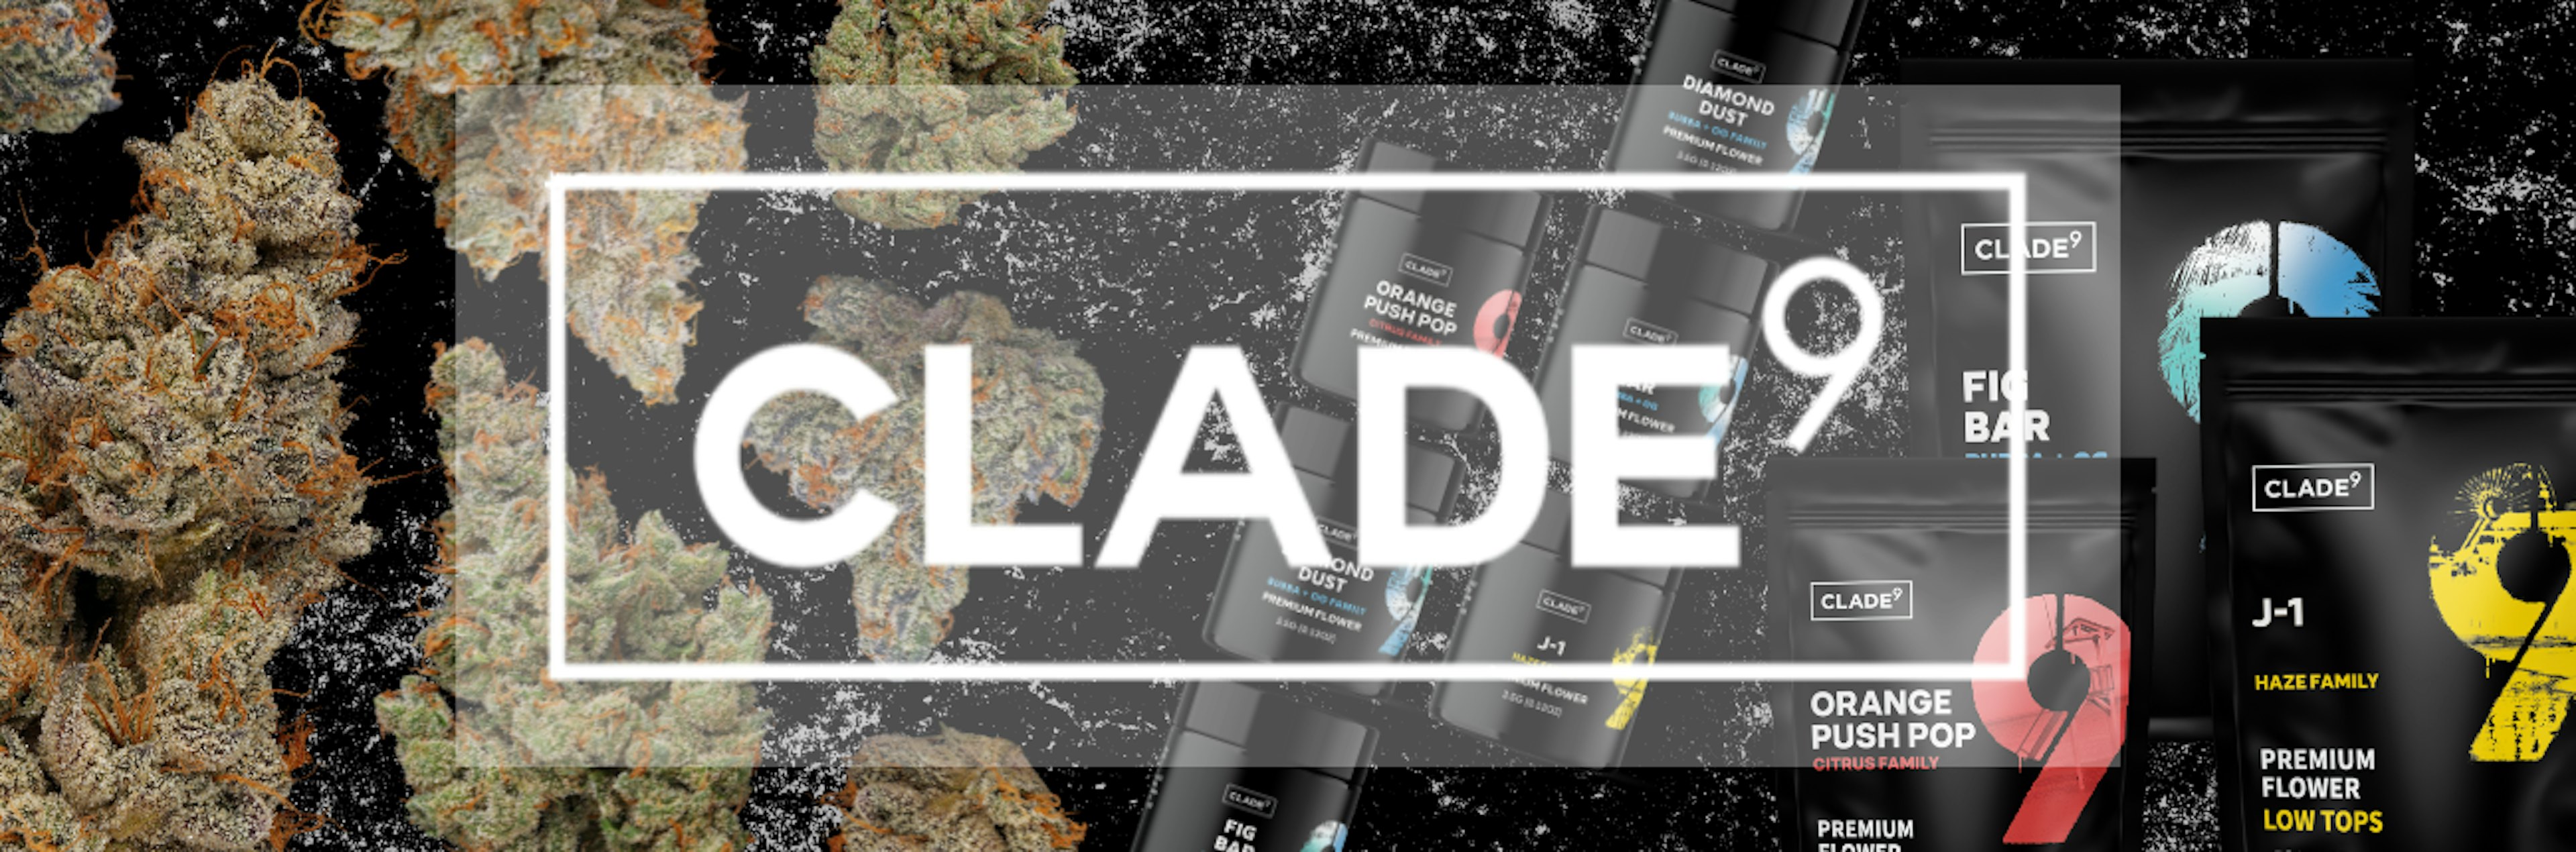 clade9